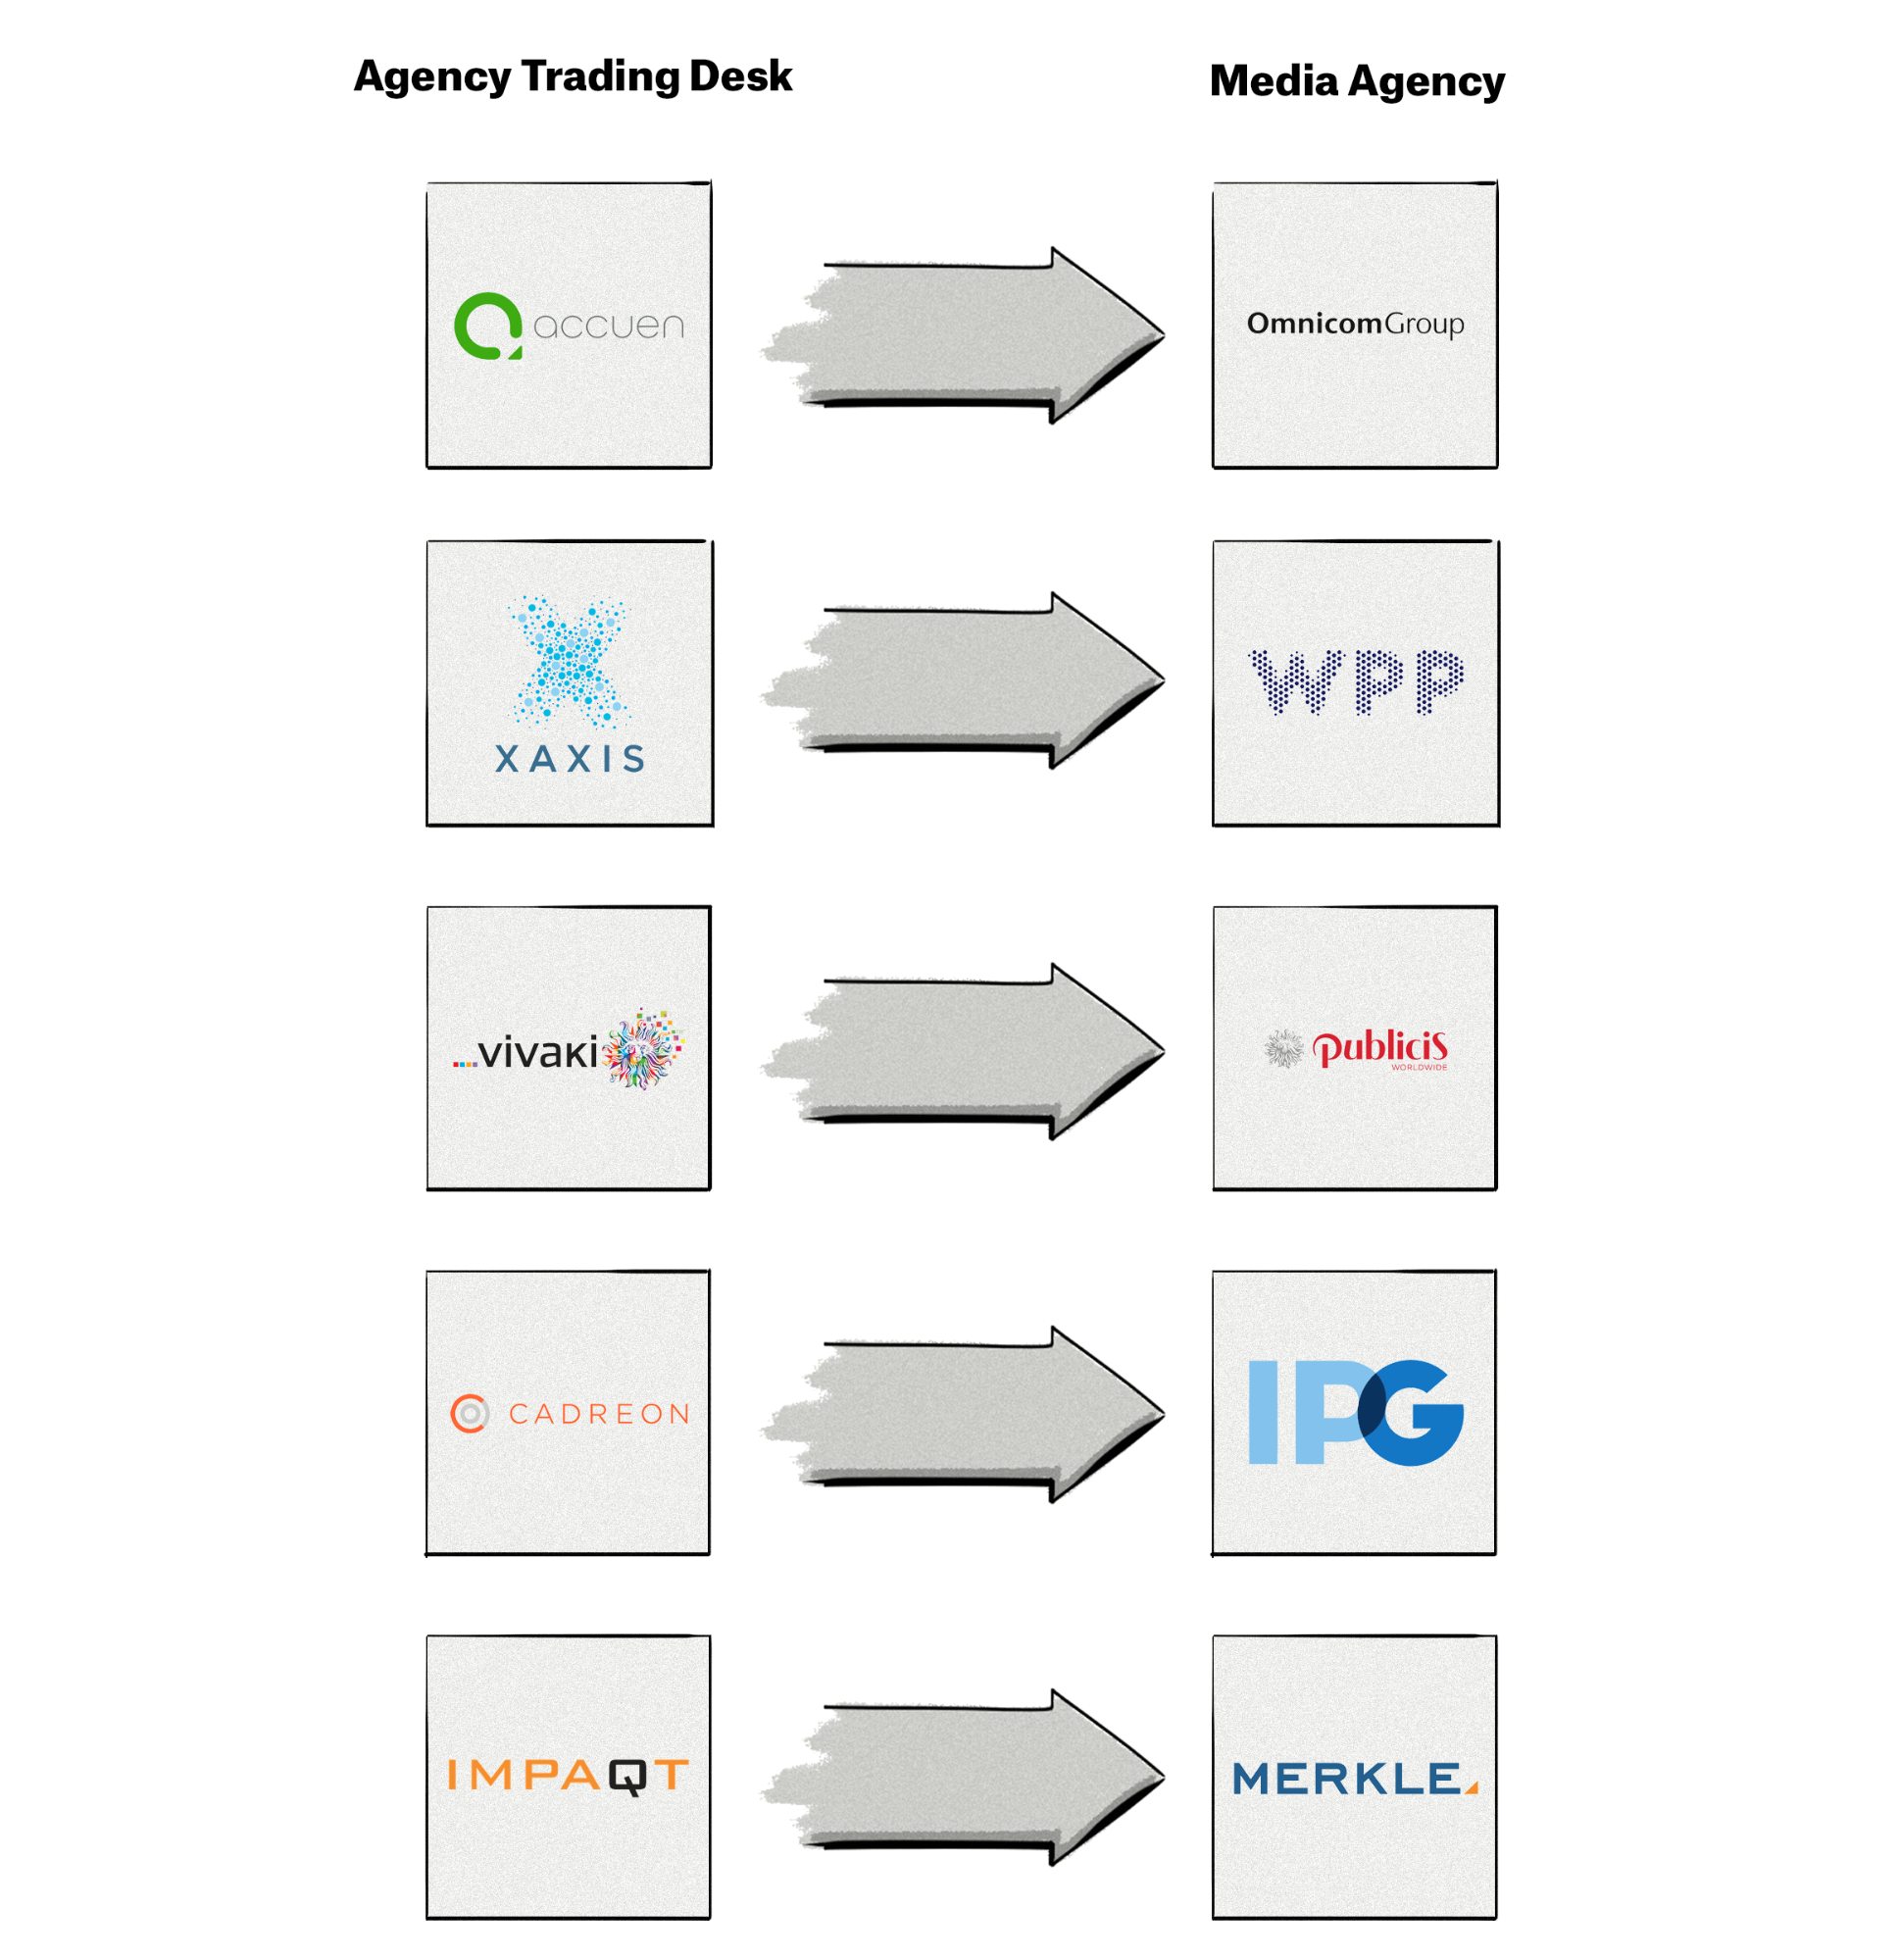 Examples of agencies and agency trading desks